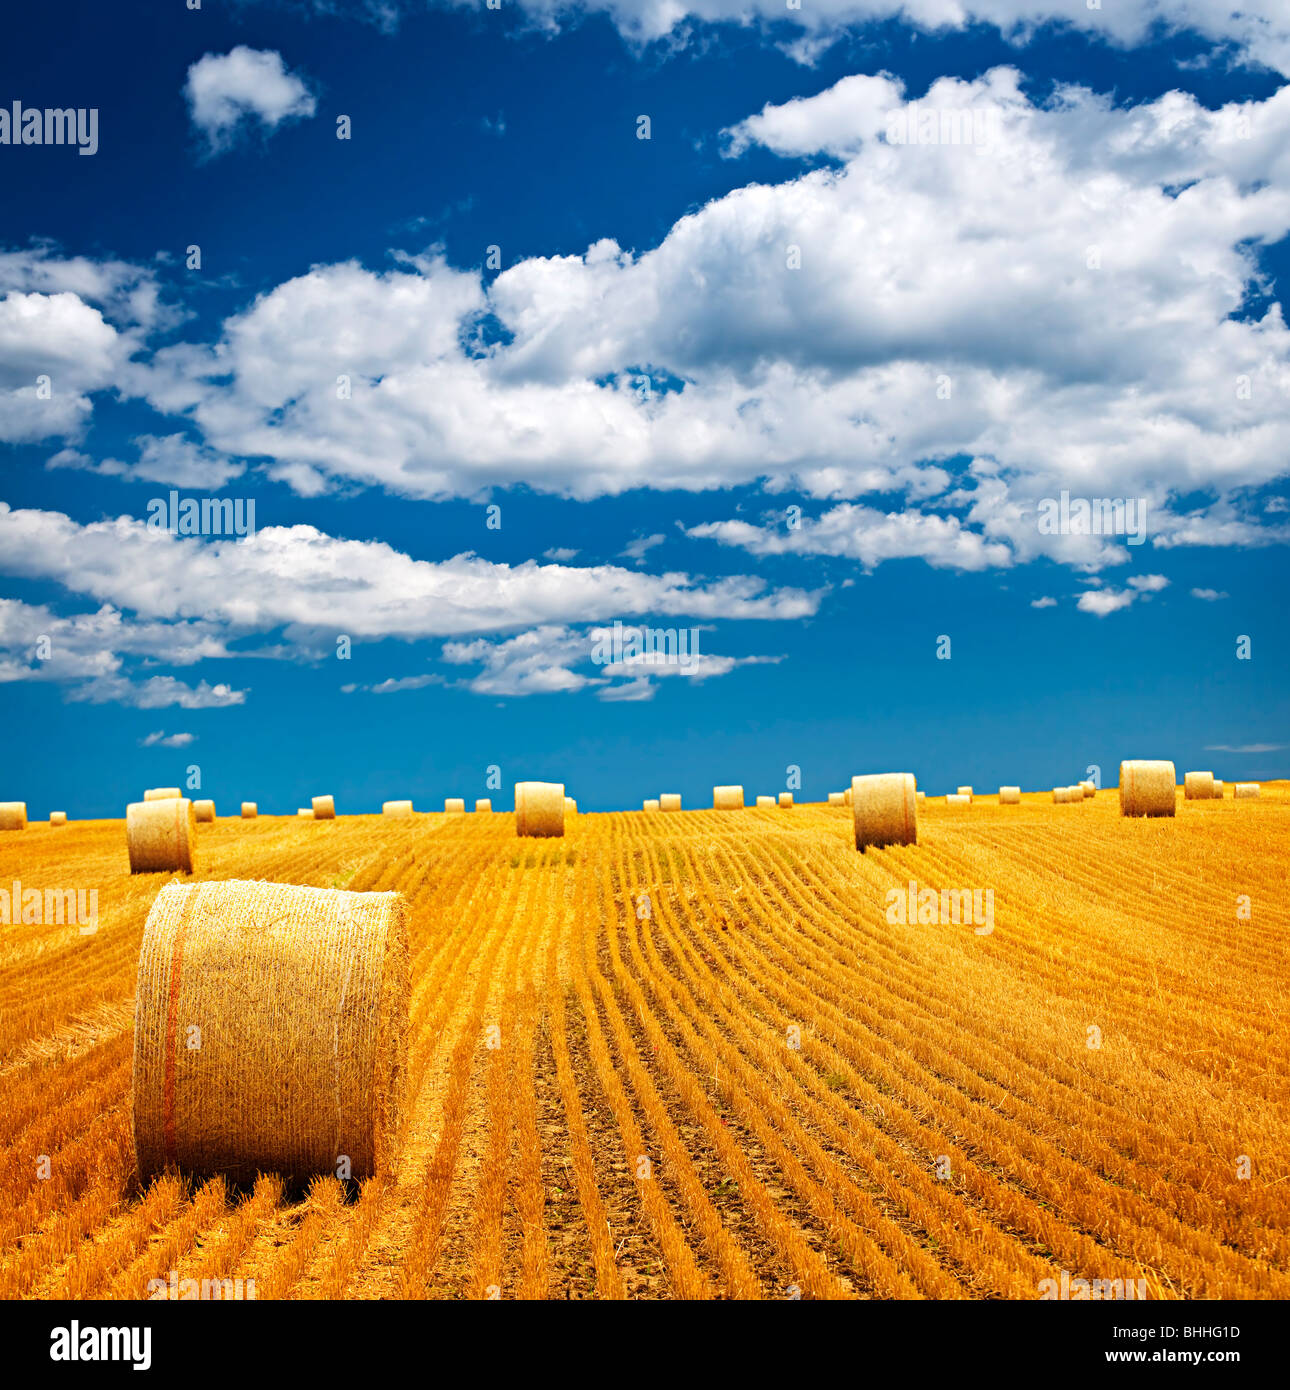 Agricultural landscape of hay bales in a golden field Stock Photo